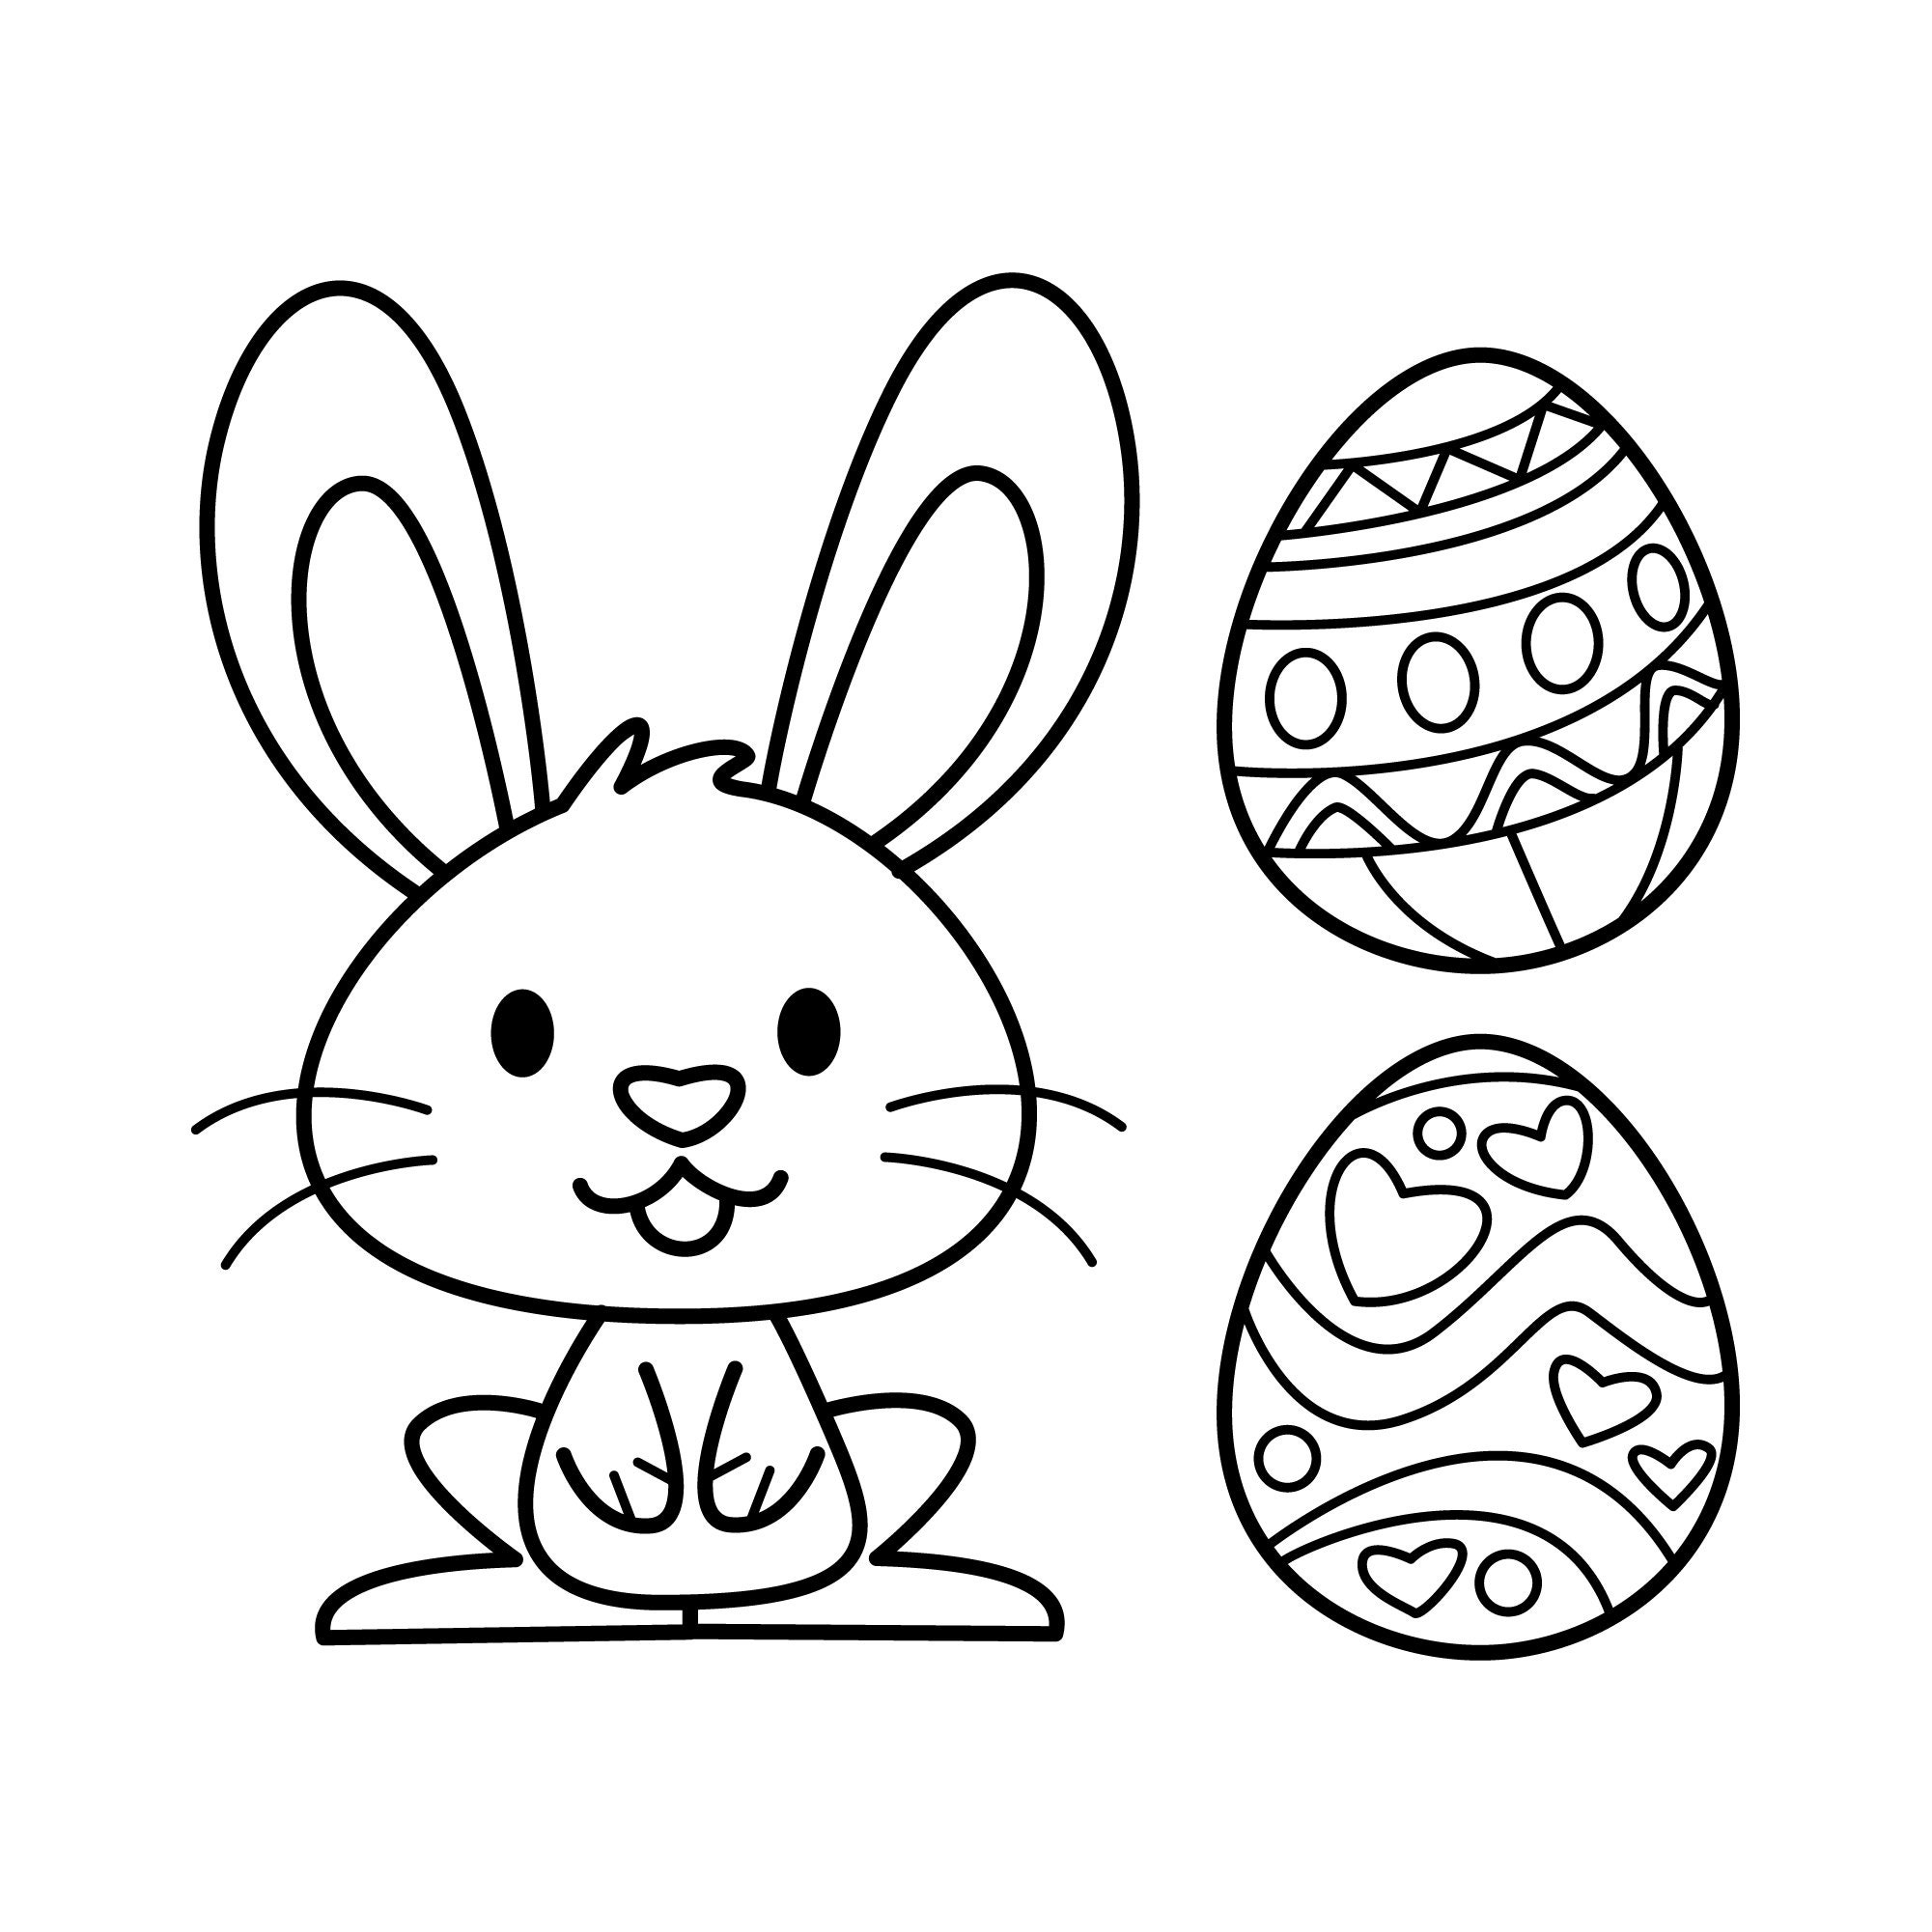 Printable digital cute easter bunny coloring book for children kids easy pages